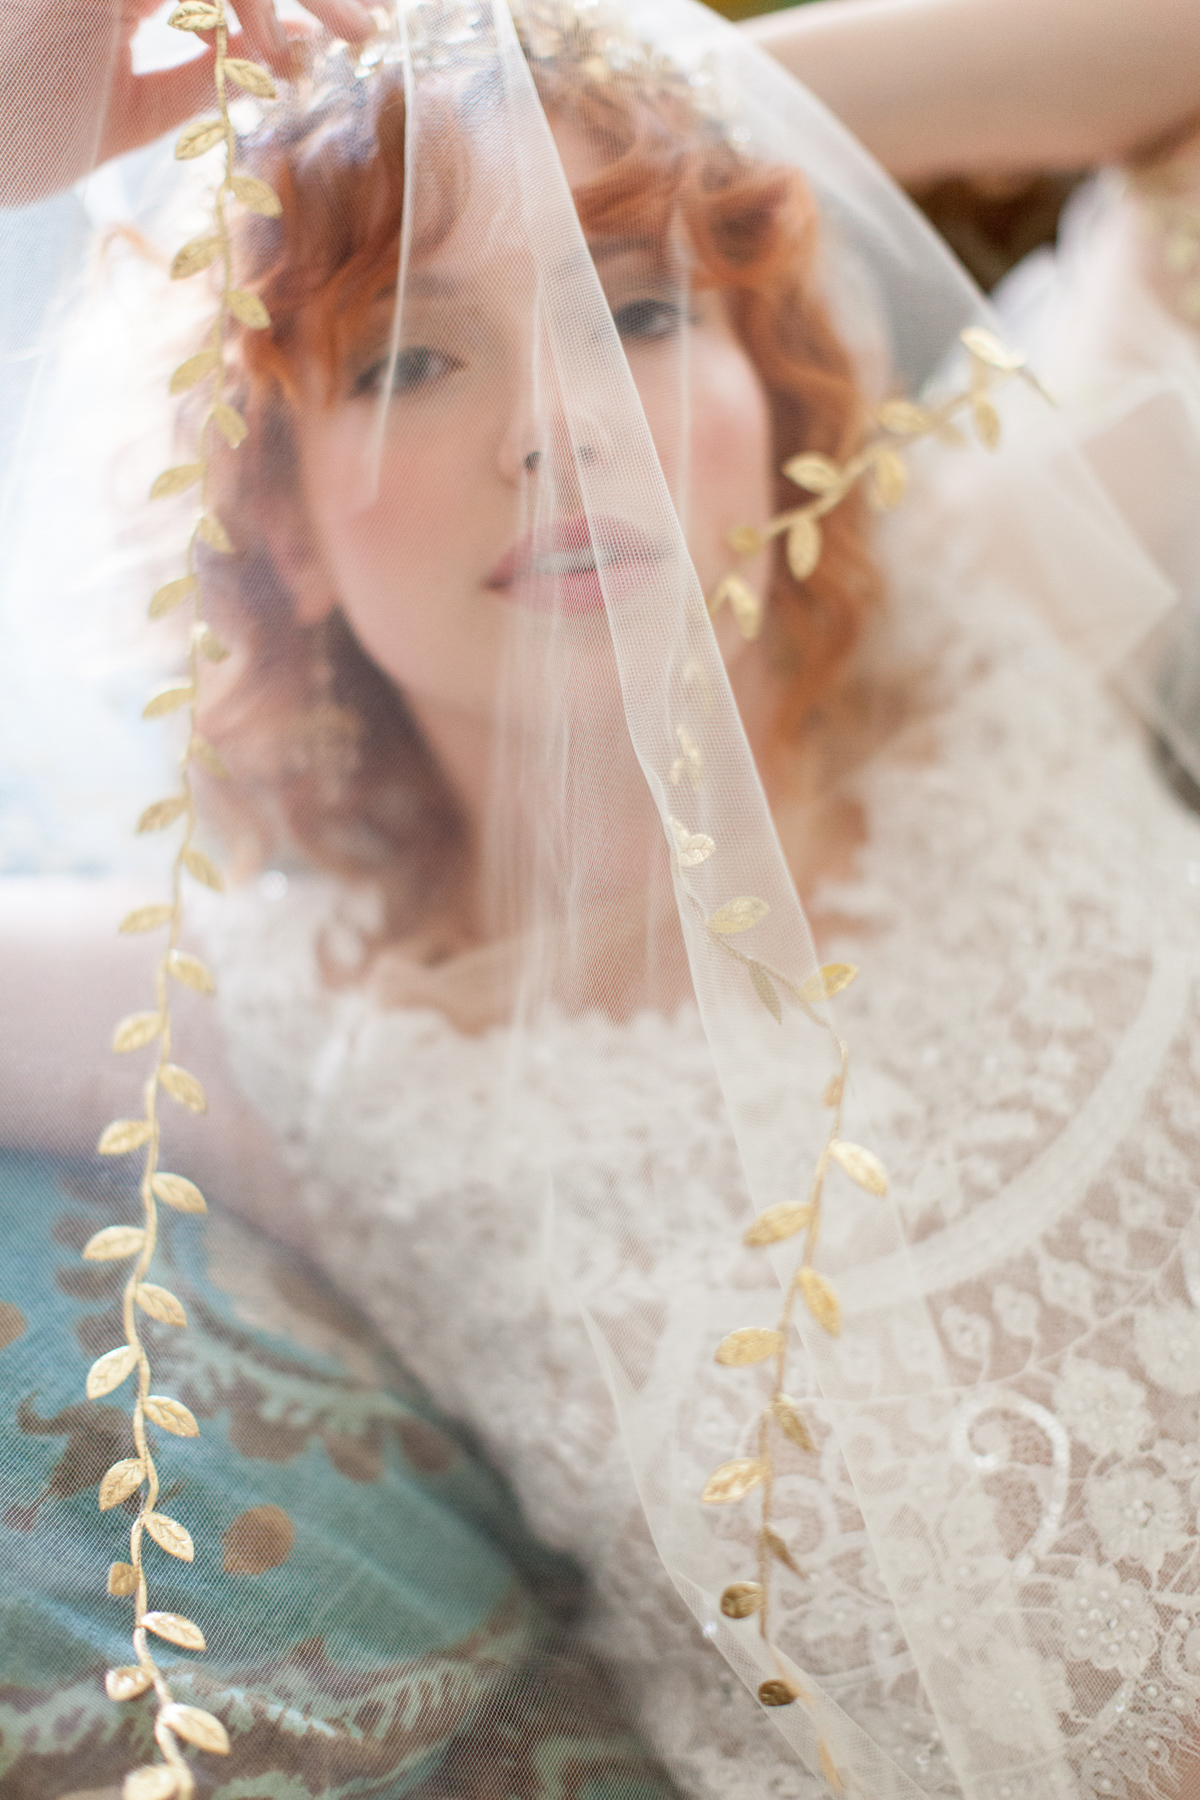 Opulent glamour inspiration for brides. Photography by Kerry Bartlett.